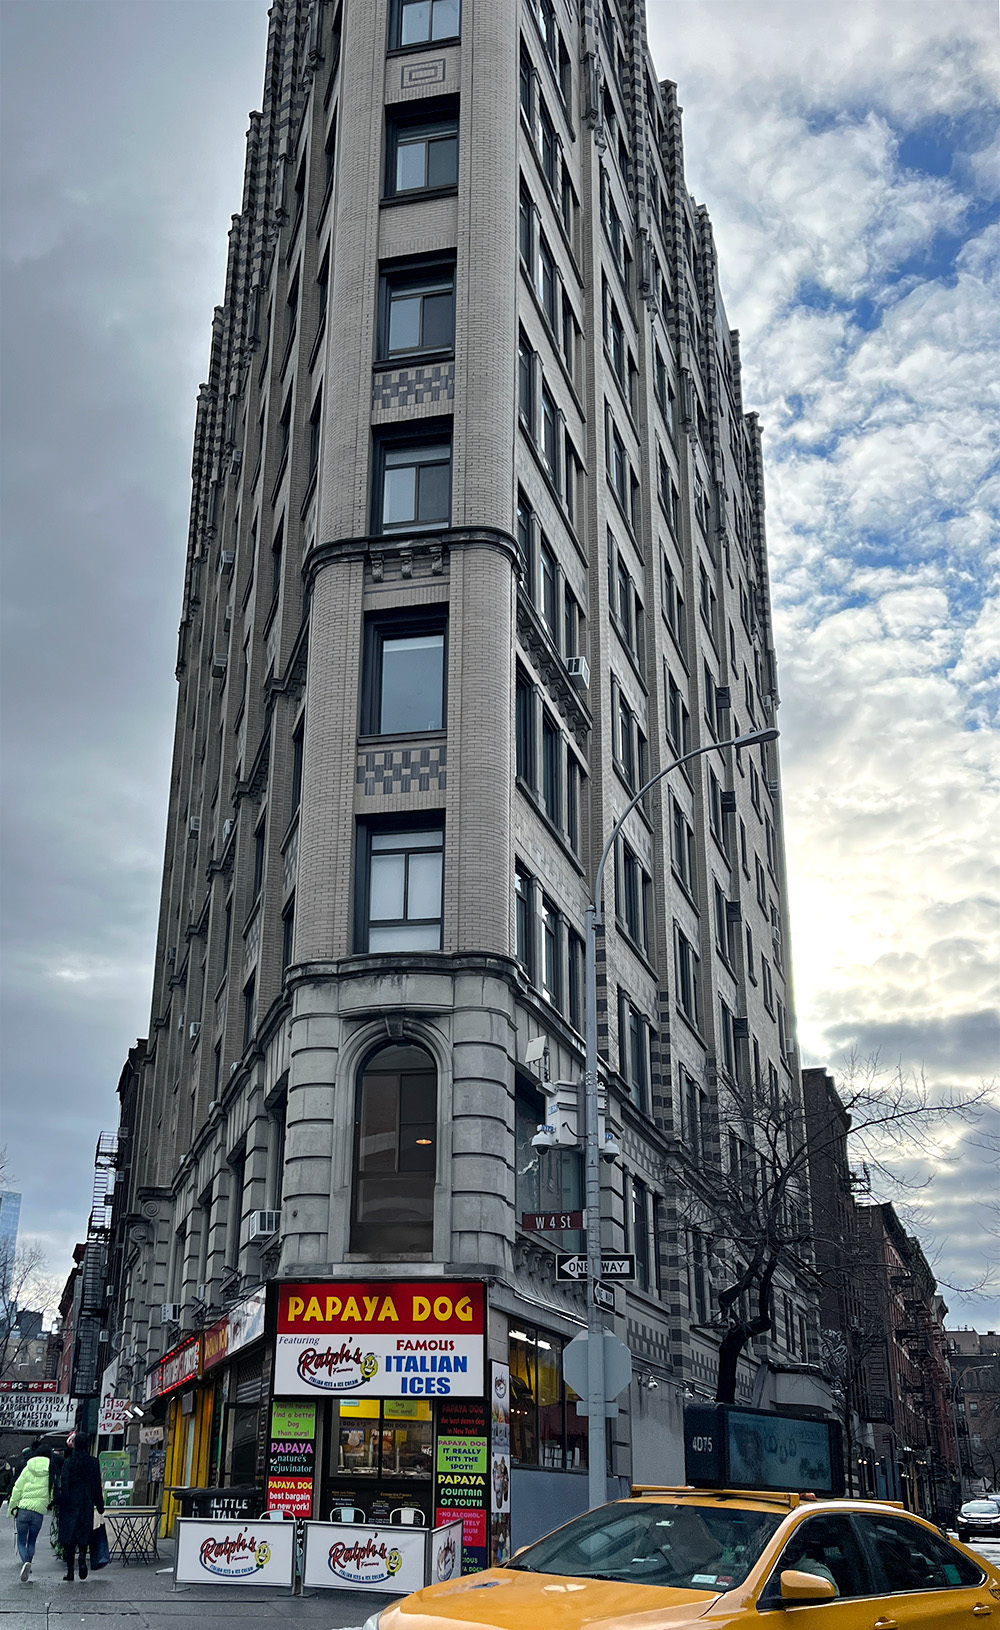 A tall building, trapozoid shape. its sharp corner faces the viewer, with a single column of windows going up. There are city streets on both sides of the building, with a yellow cab in front of the building.